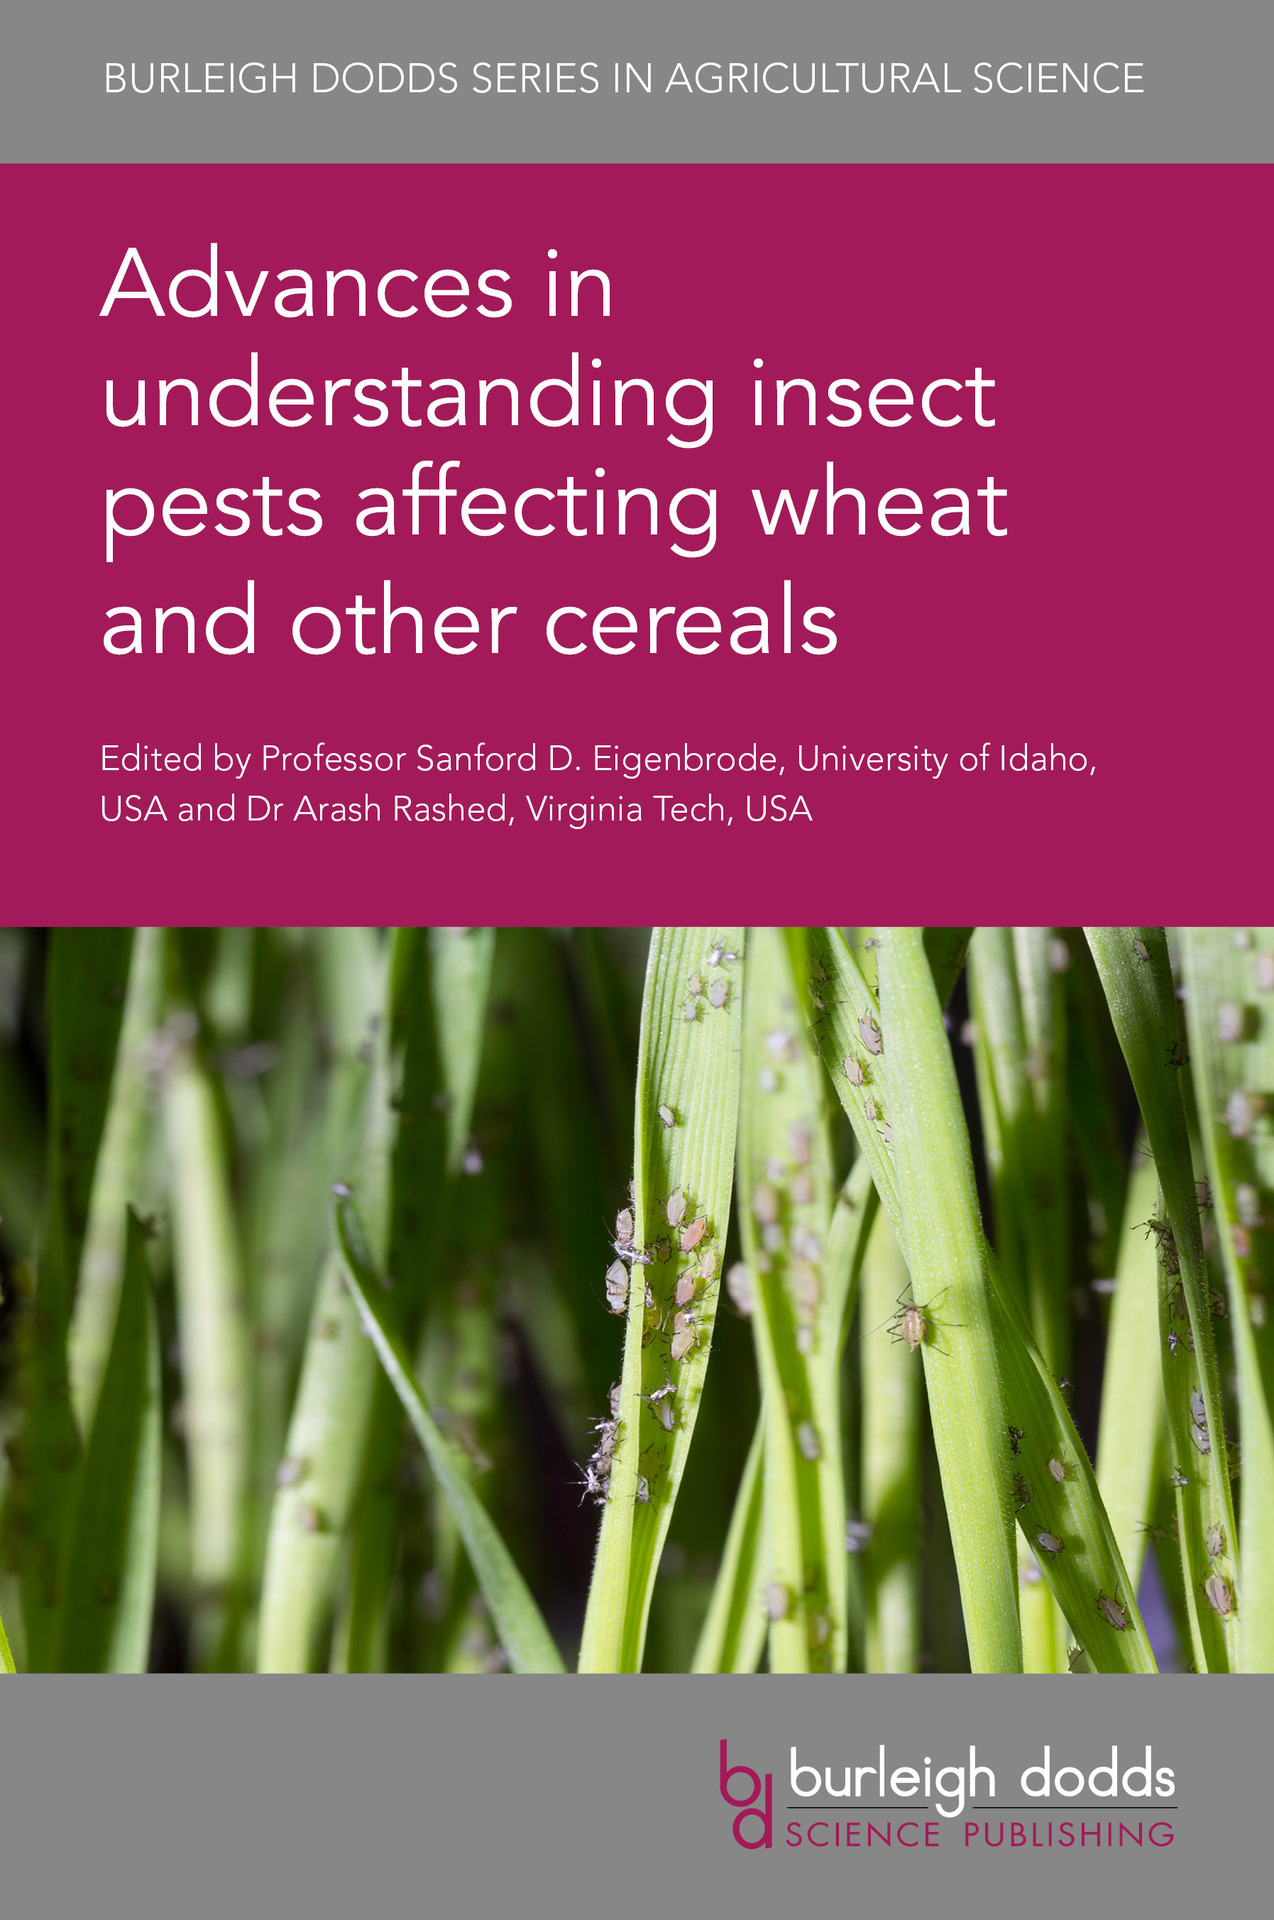 Advances in understanding insect pests affecting wheat and other cereals - Cover image